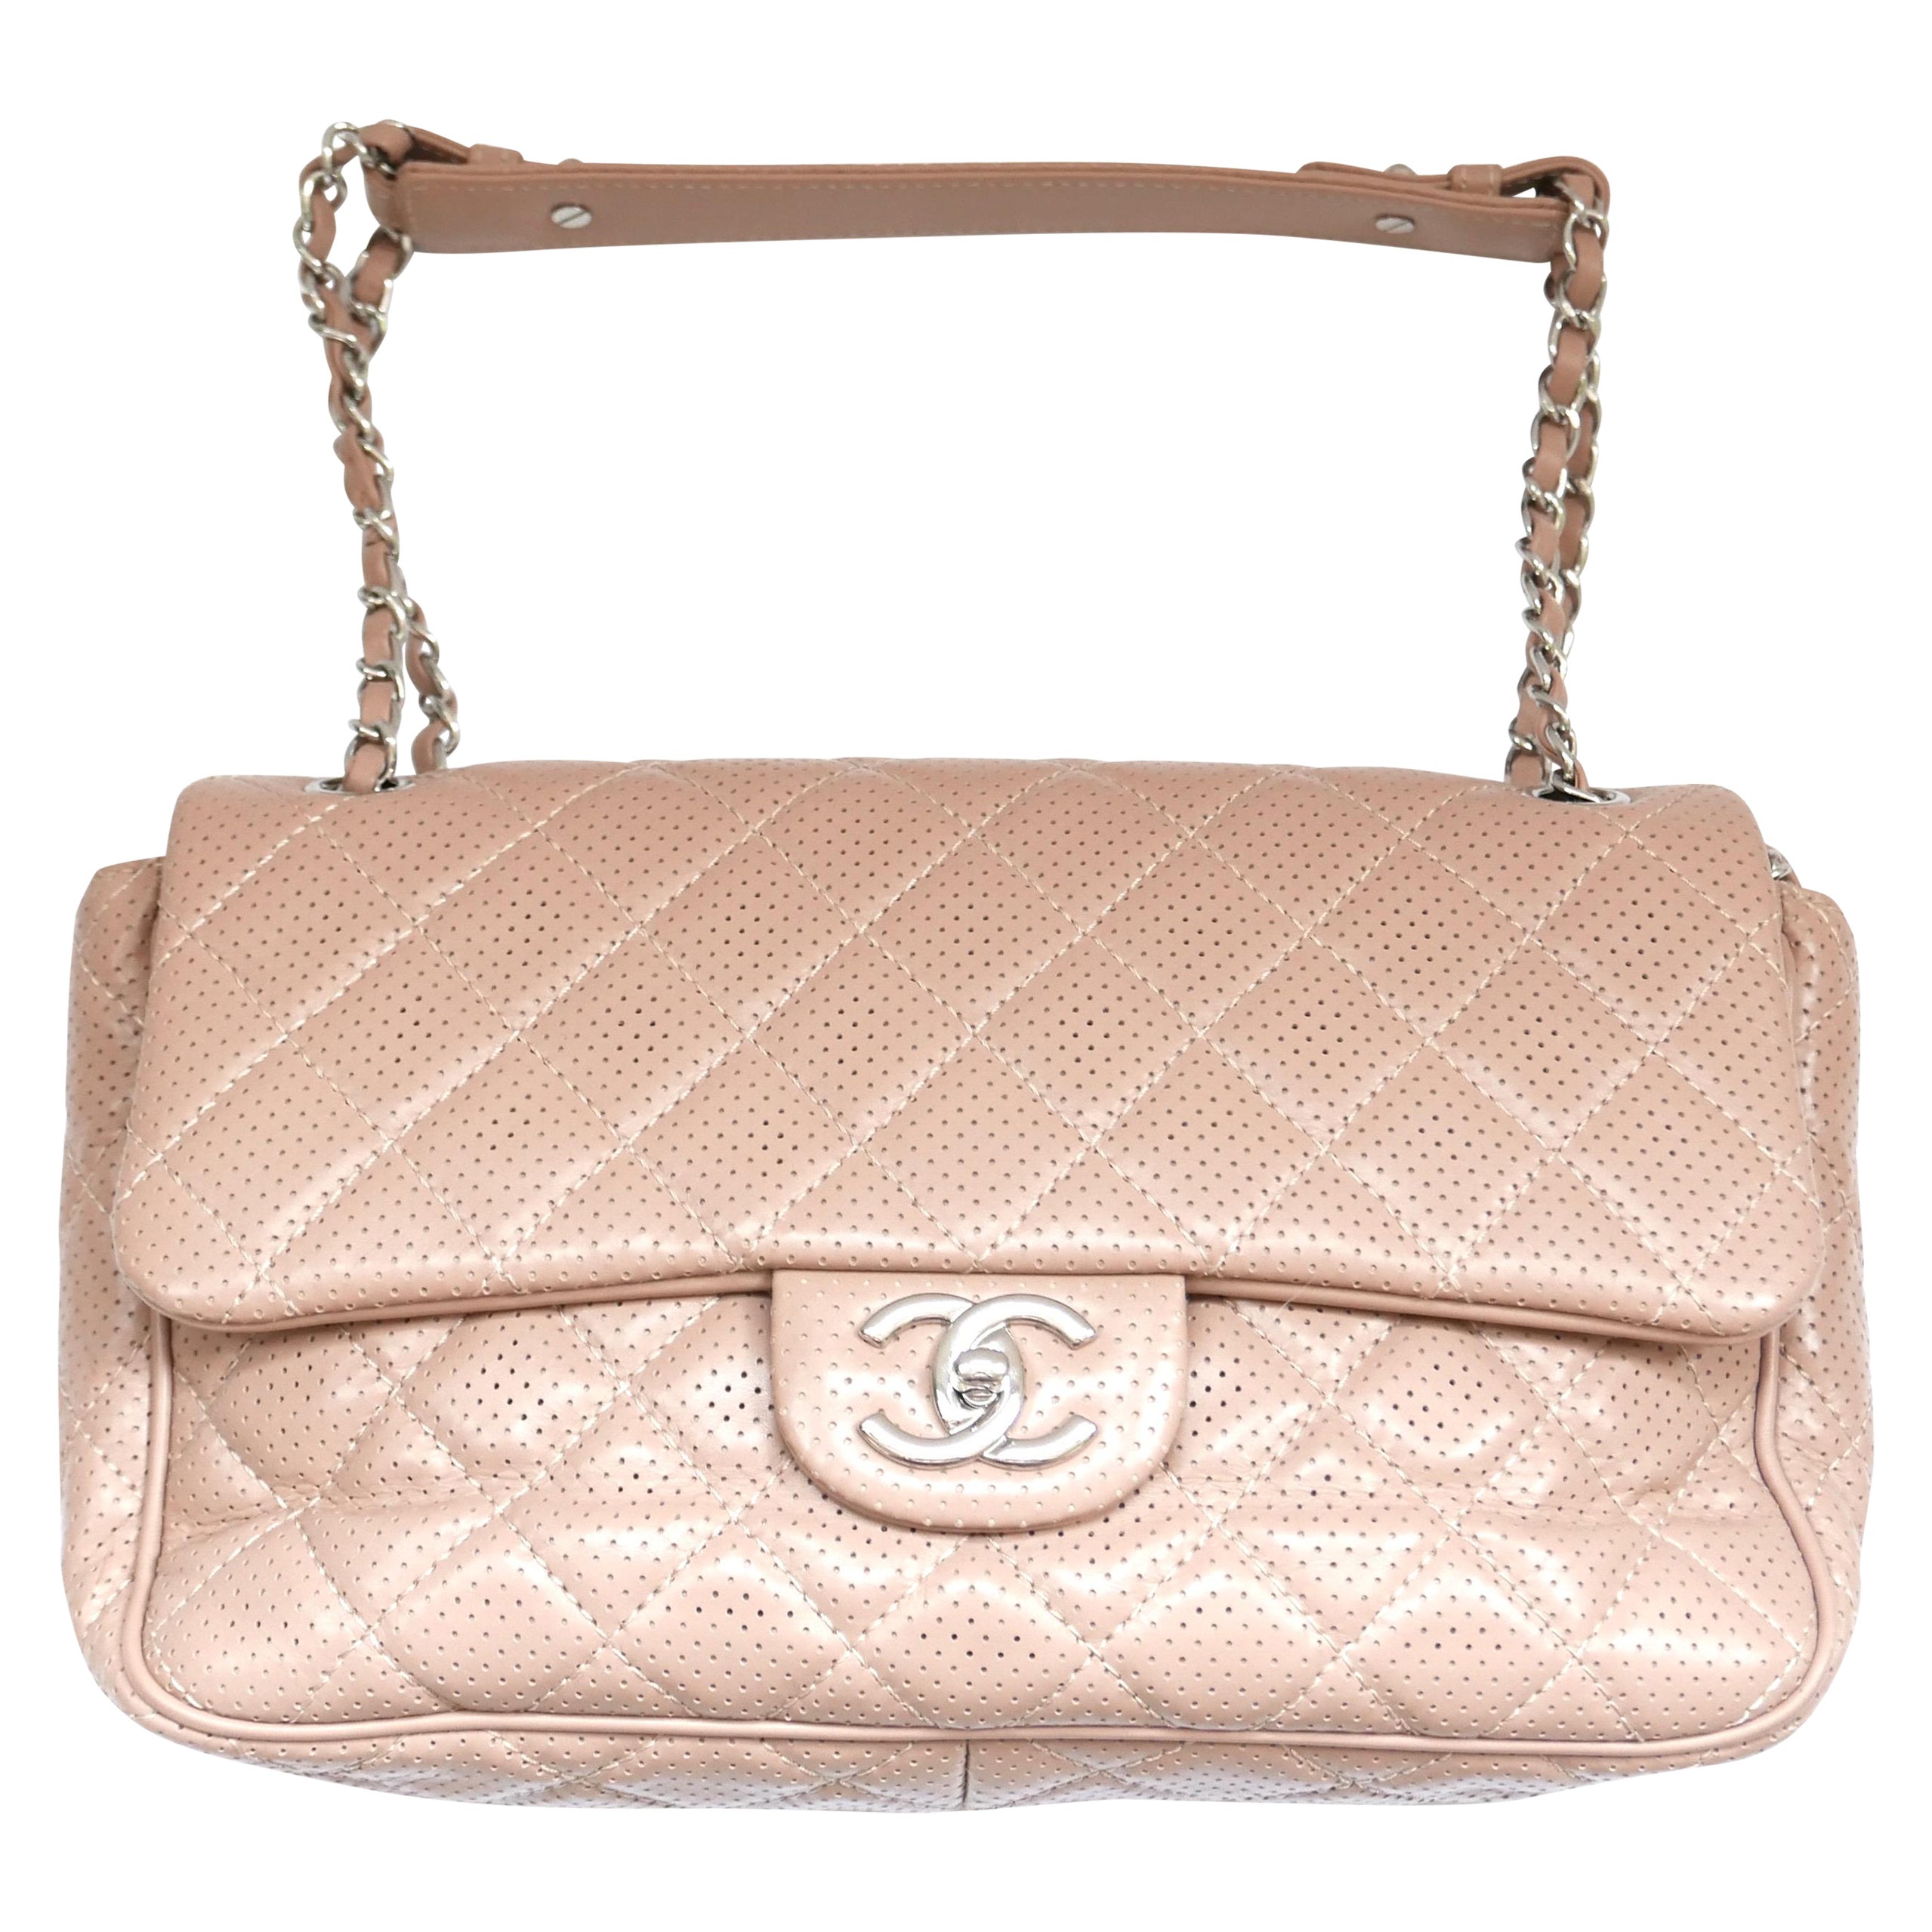 Chanel Beige Perforated Leather Classique Flap Bag For Sale